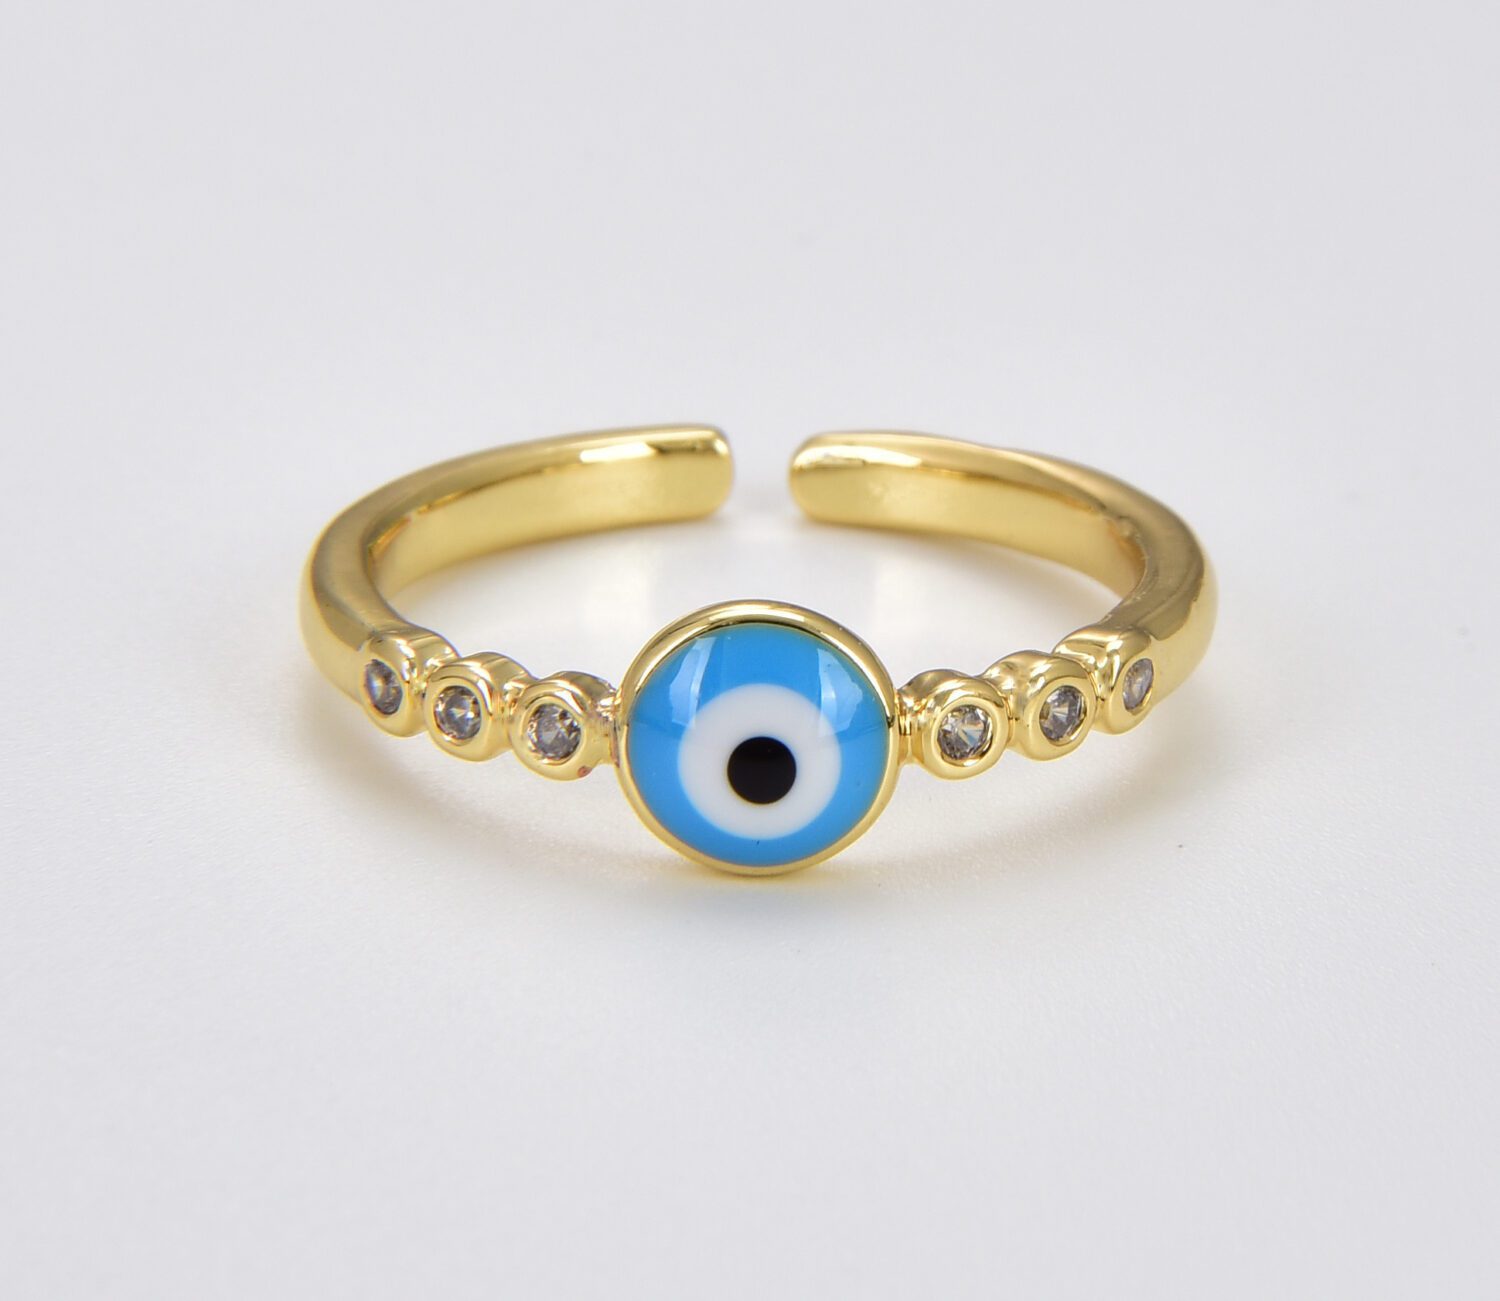 Buy Evil Eye Rings Online| Made with BIS Hallmarked Gold | Starkle